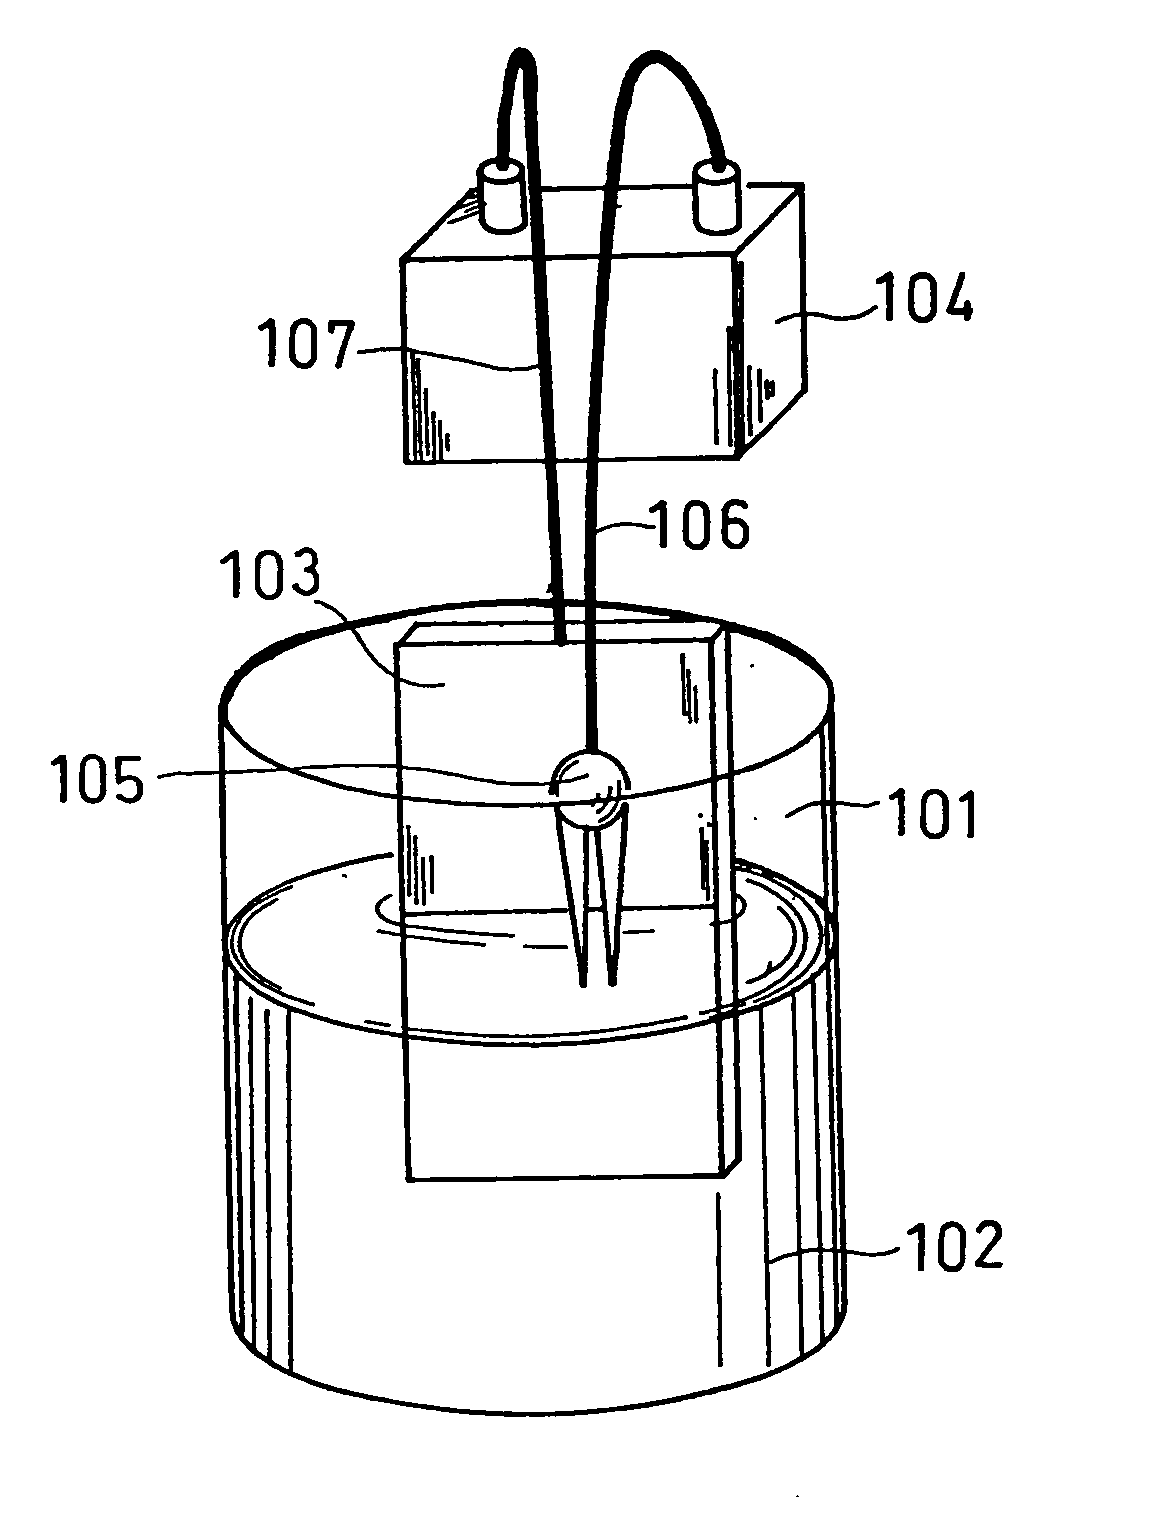 Method and apparatus for releasing metal-resin joint